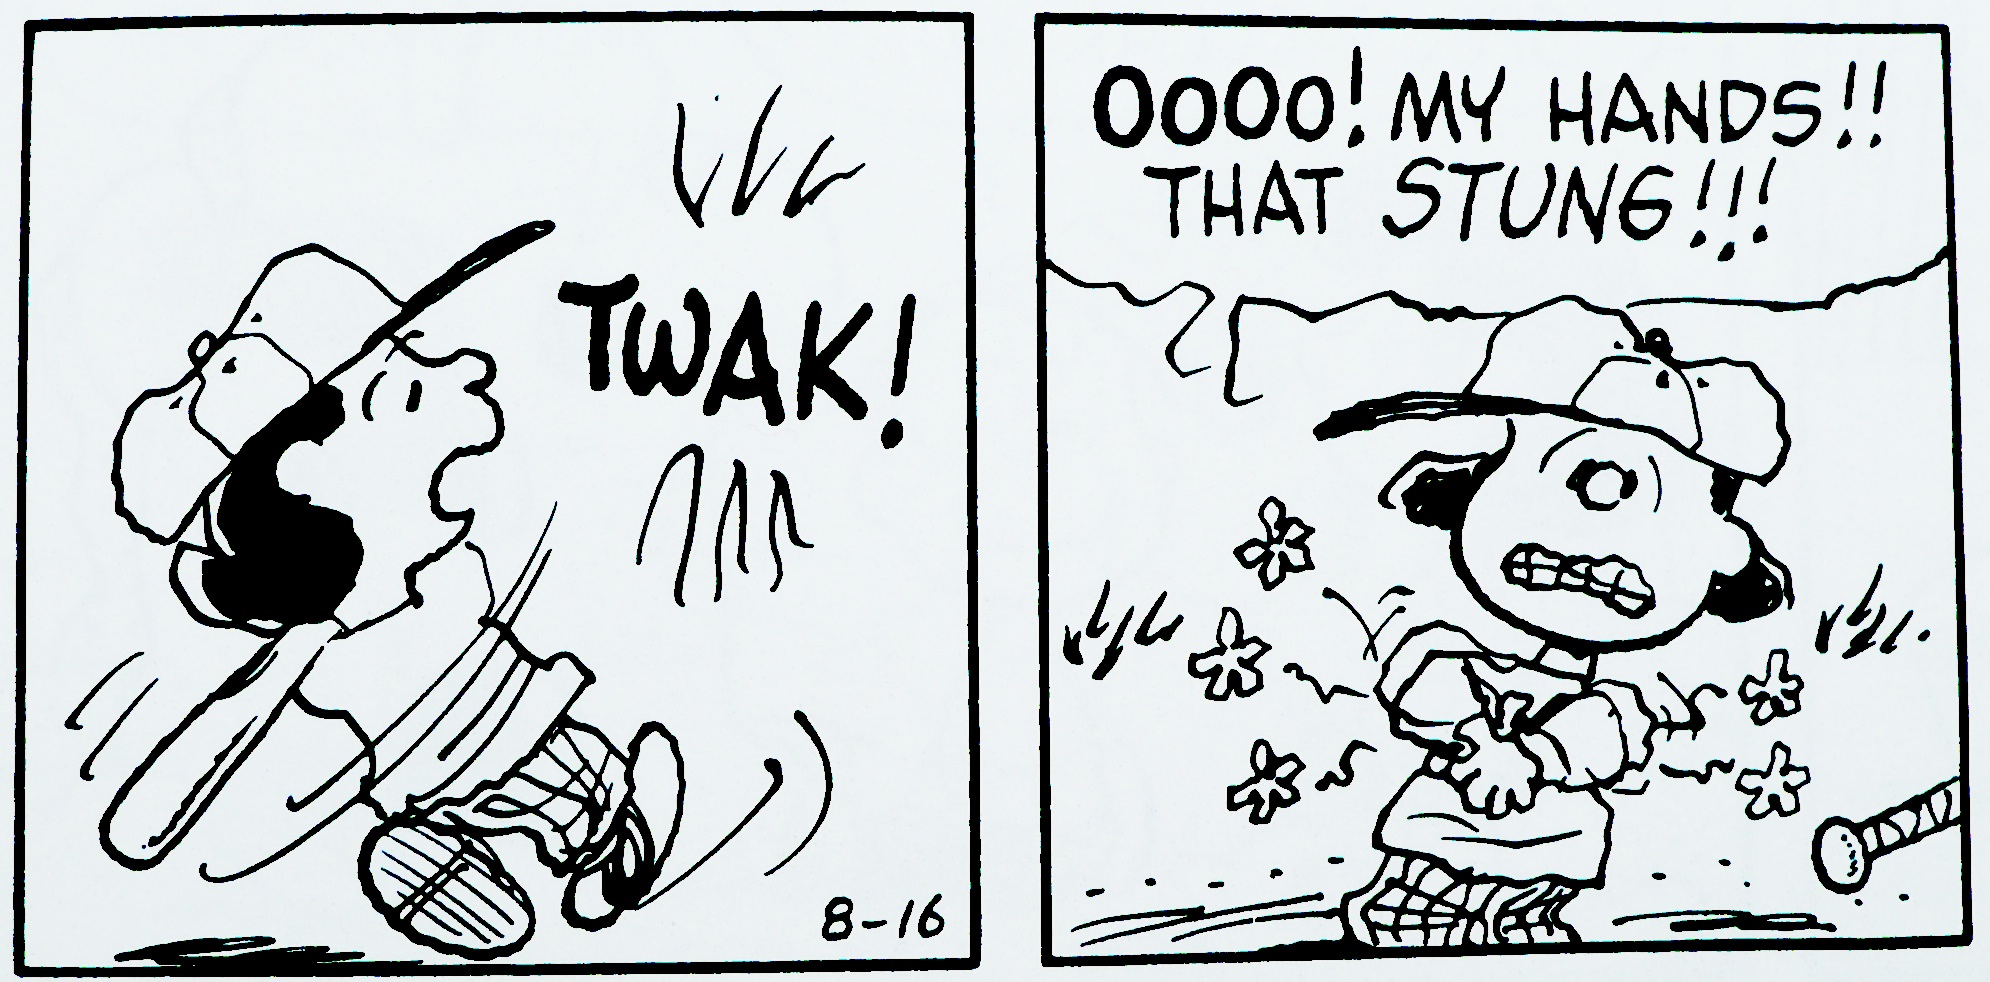 two frames from a Peanuts cartoon showing Lucy swinging a baseball bat and complaining when her hands get stung